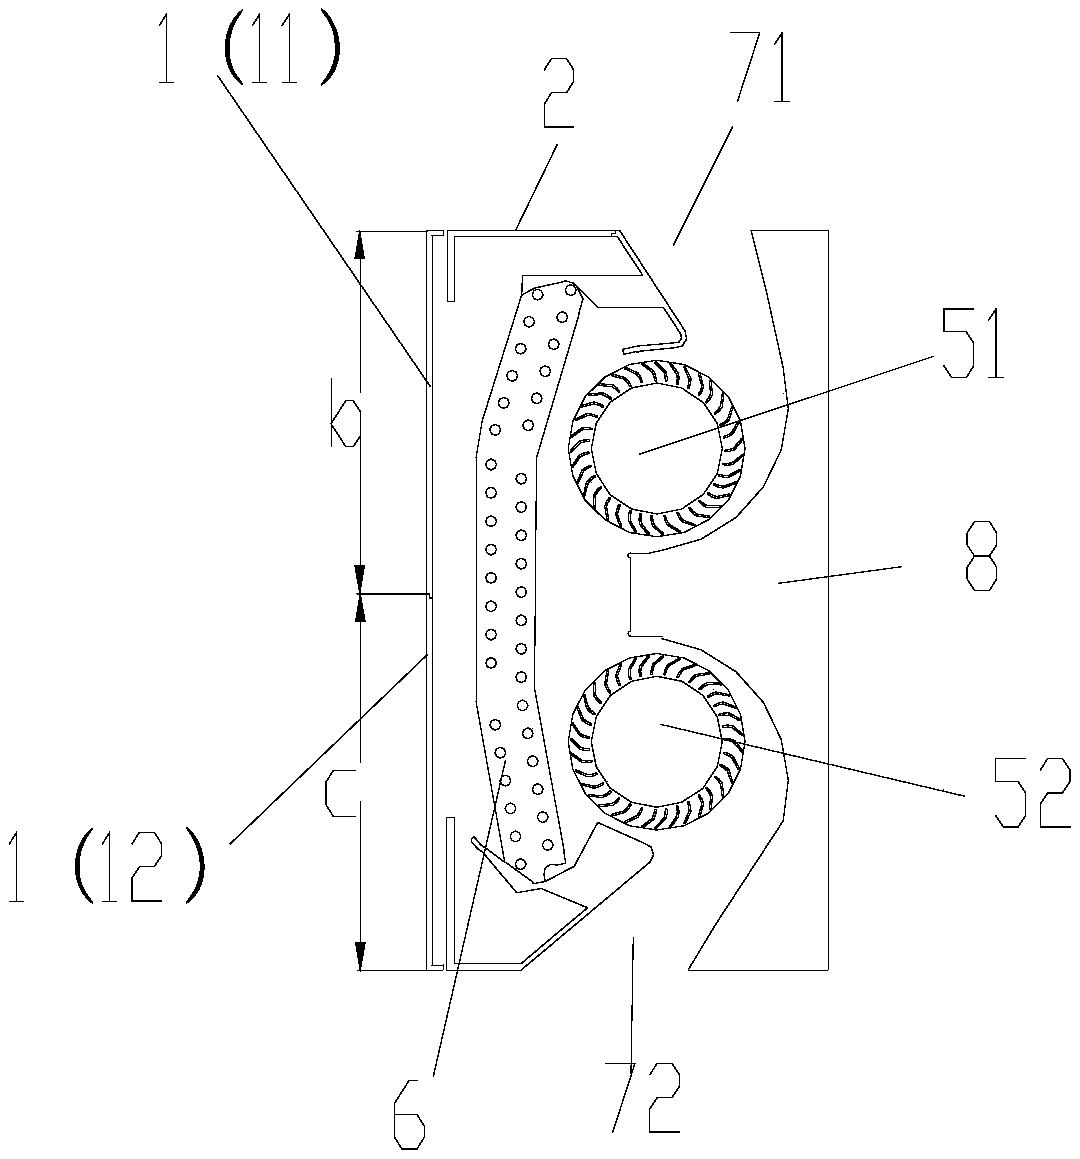 Panel structure capable of achieving uniform air input, air conditioner indoor unit and air conditioner